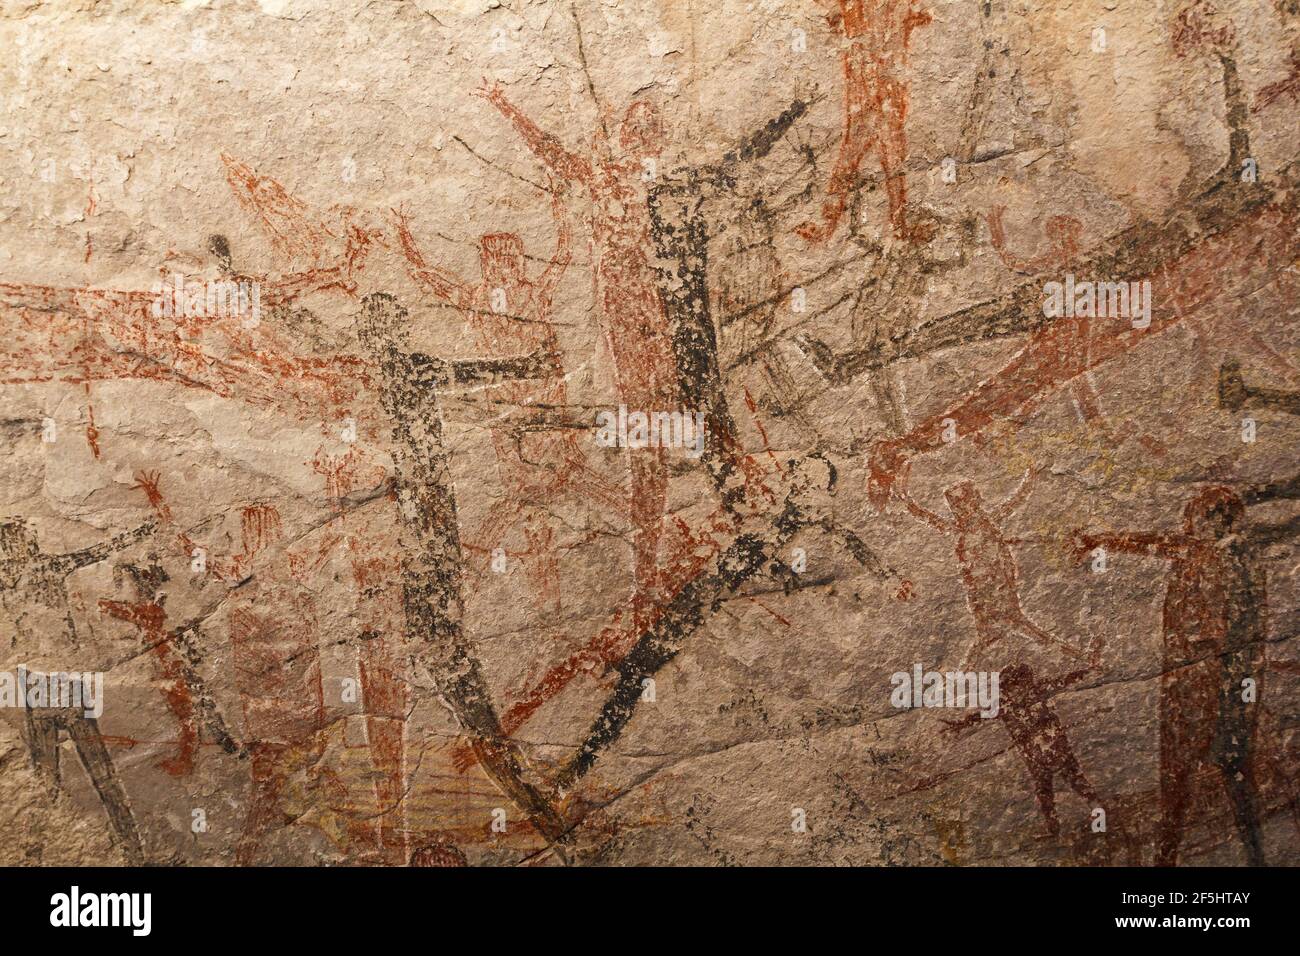 Cave paintings of San Borjita dating back 7,500 years made by the Cochimí people of the Mexican state of Baja California Sur Stock Photo